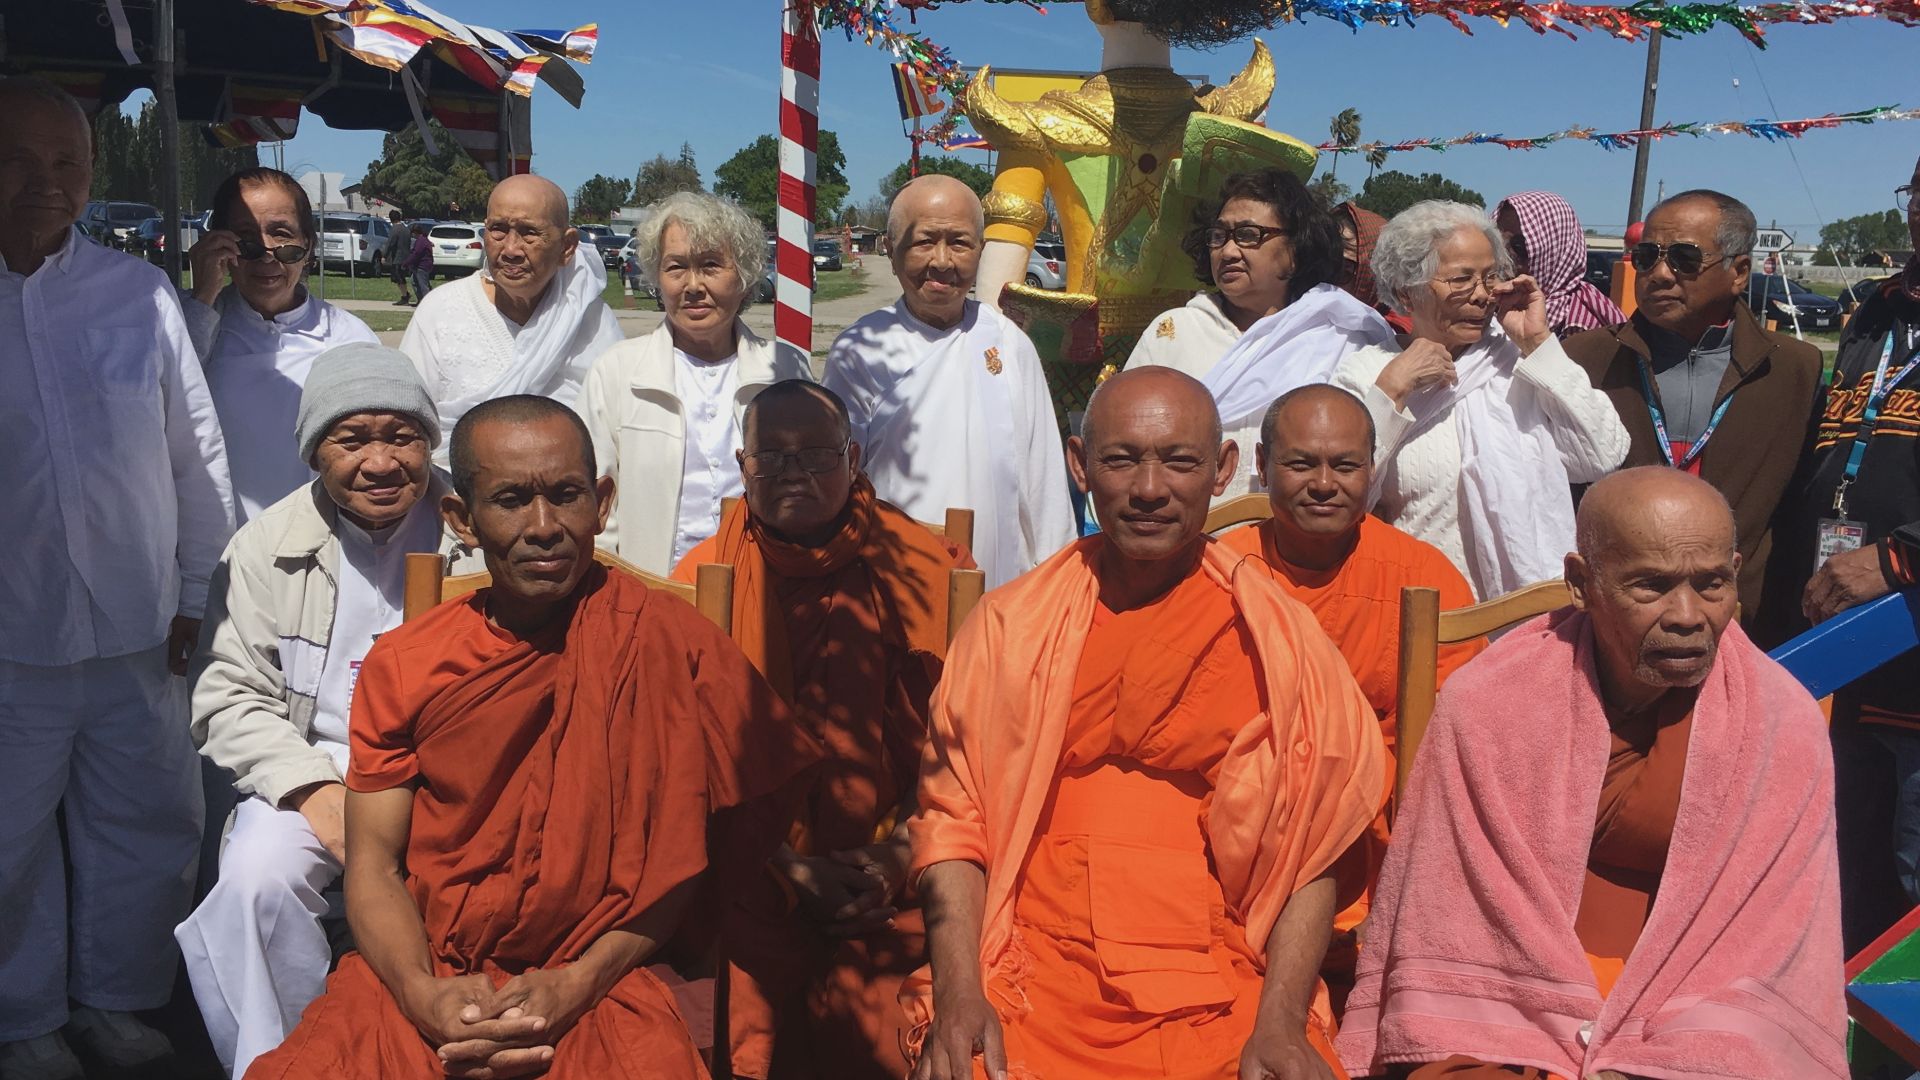 Held each year at the Wat Dhammararam Buddhist Temple in Southeast Stockton, the Cambodian new year celebration draws visitors from across California.